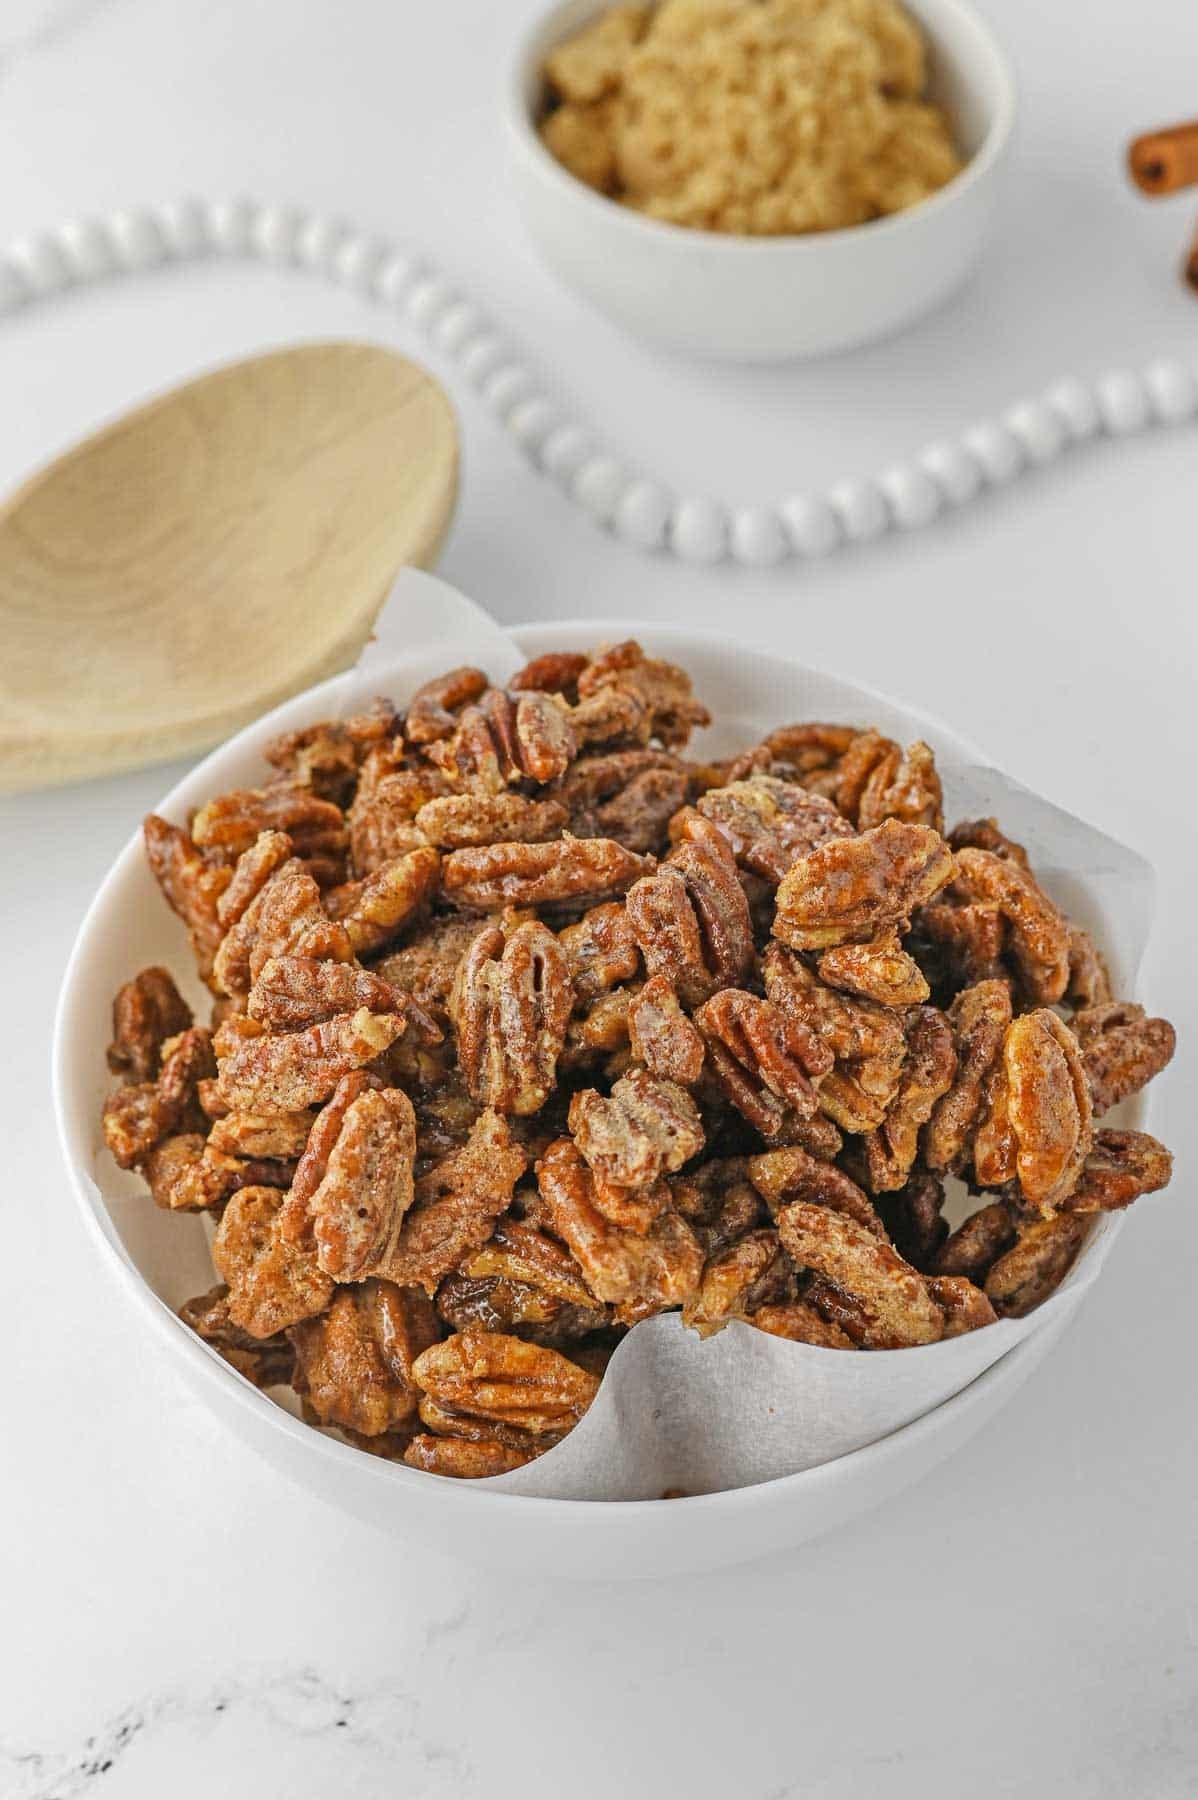 cinnamon sugar coated pecans in a white bowl on a marble countertop.